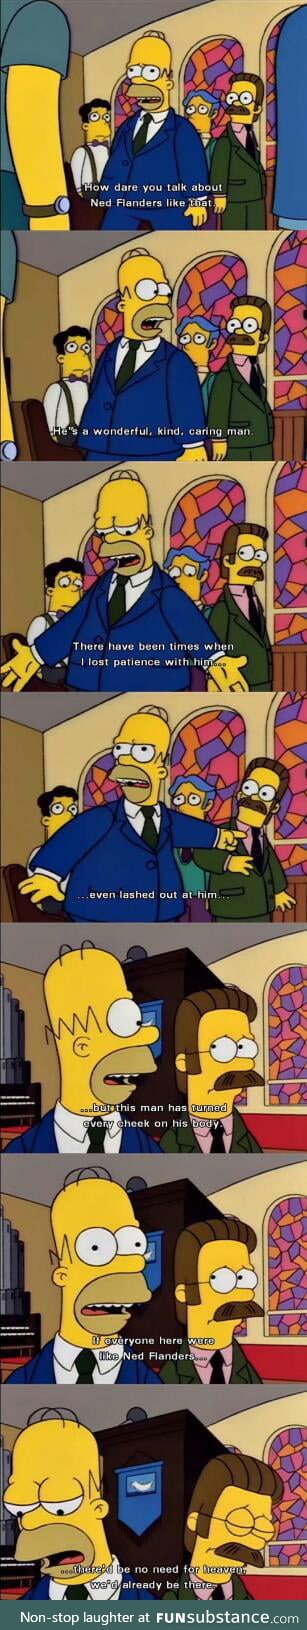 Wholesome simpsons (:-